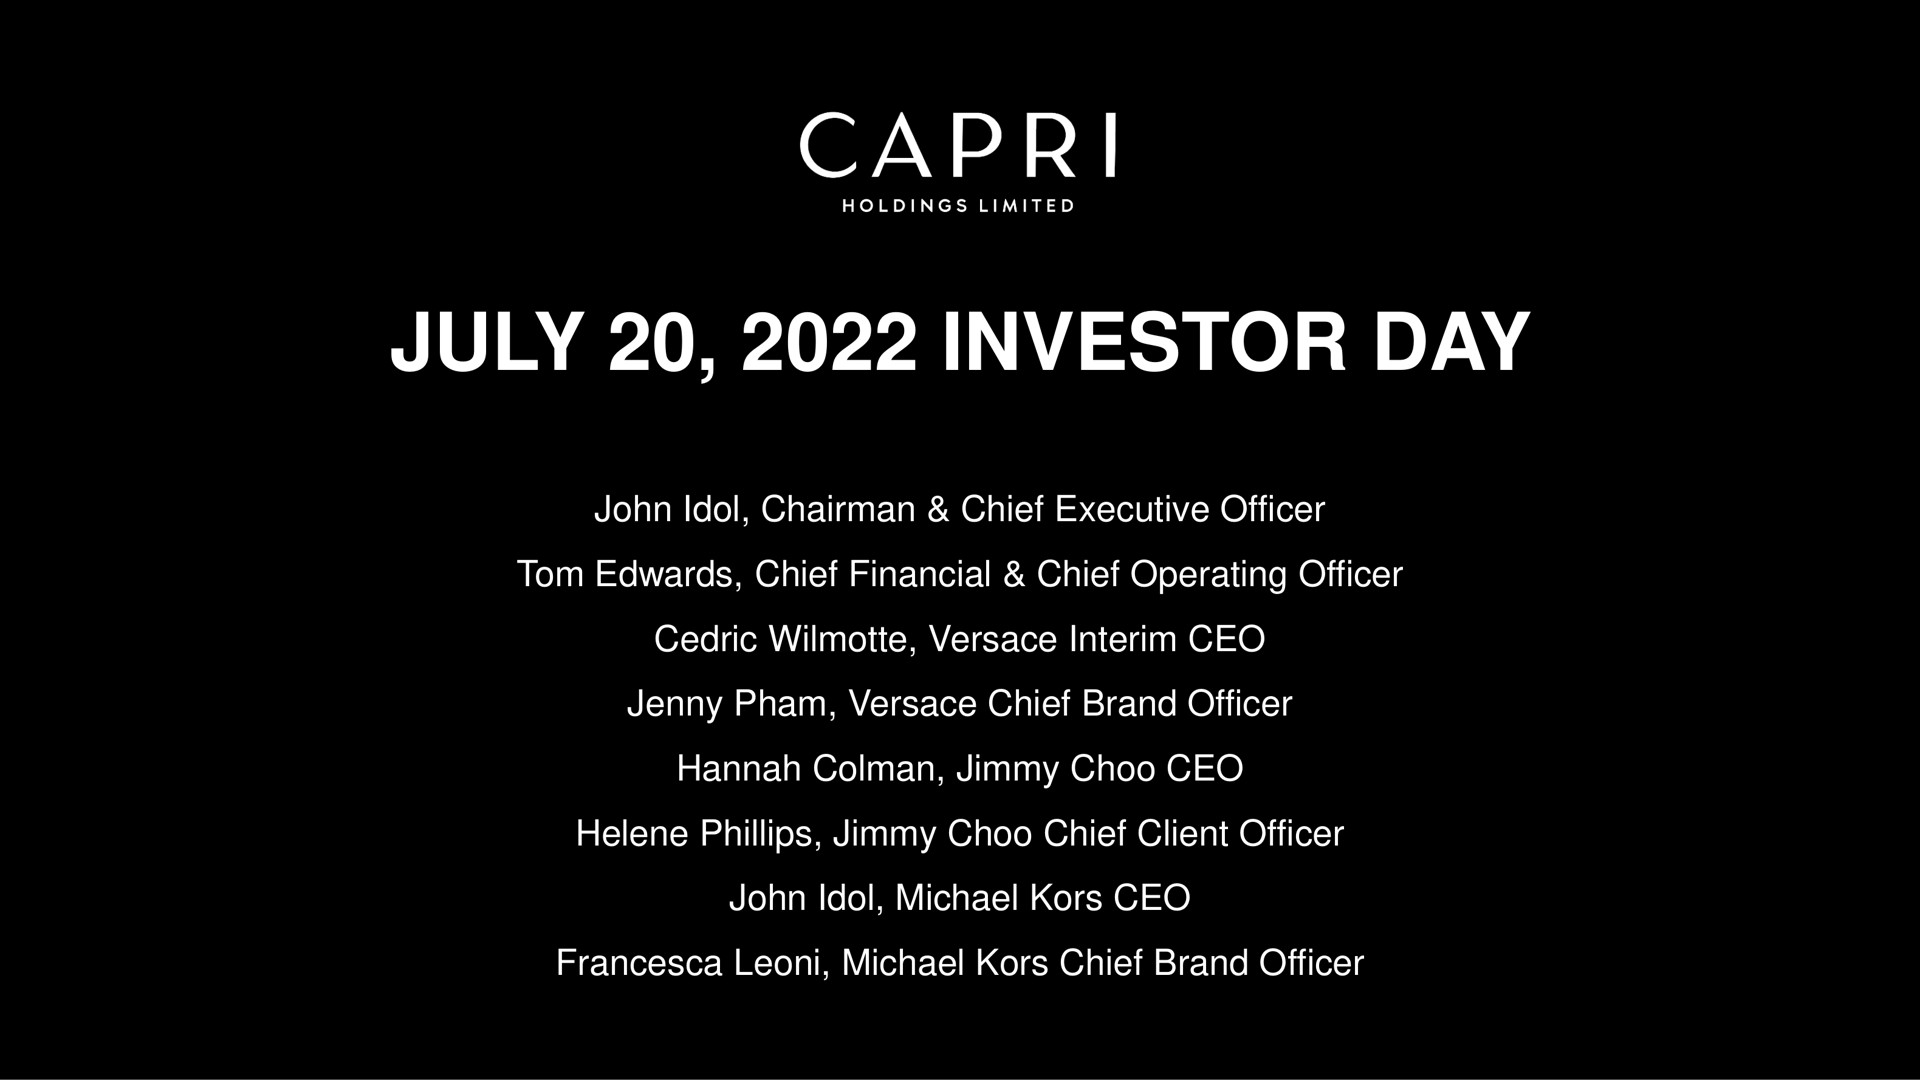 investor day holdings limited idol chairman chief executive officer chief financial chief operating officer interim jenny chief brand officer jimmy jimmy chief client officer idol kors kors chief brand officer | Capri Holdings